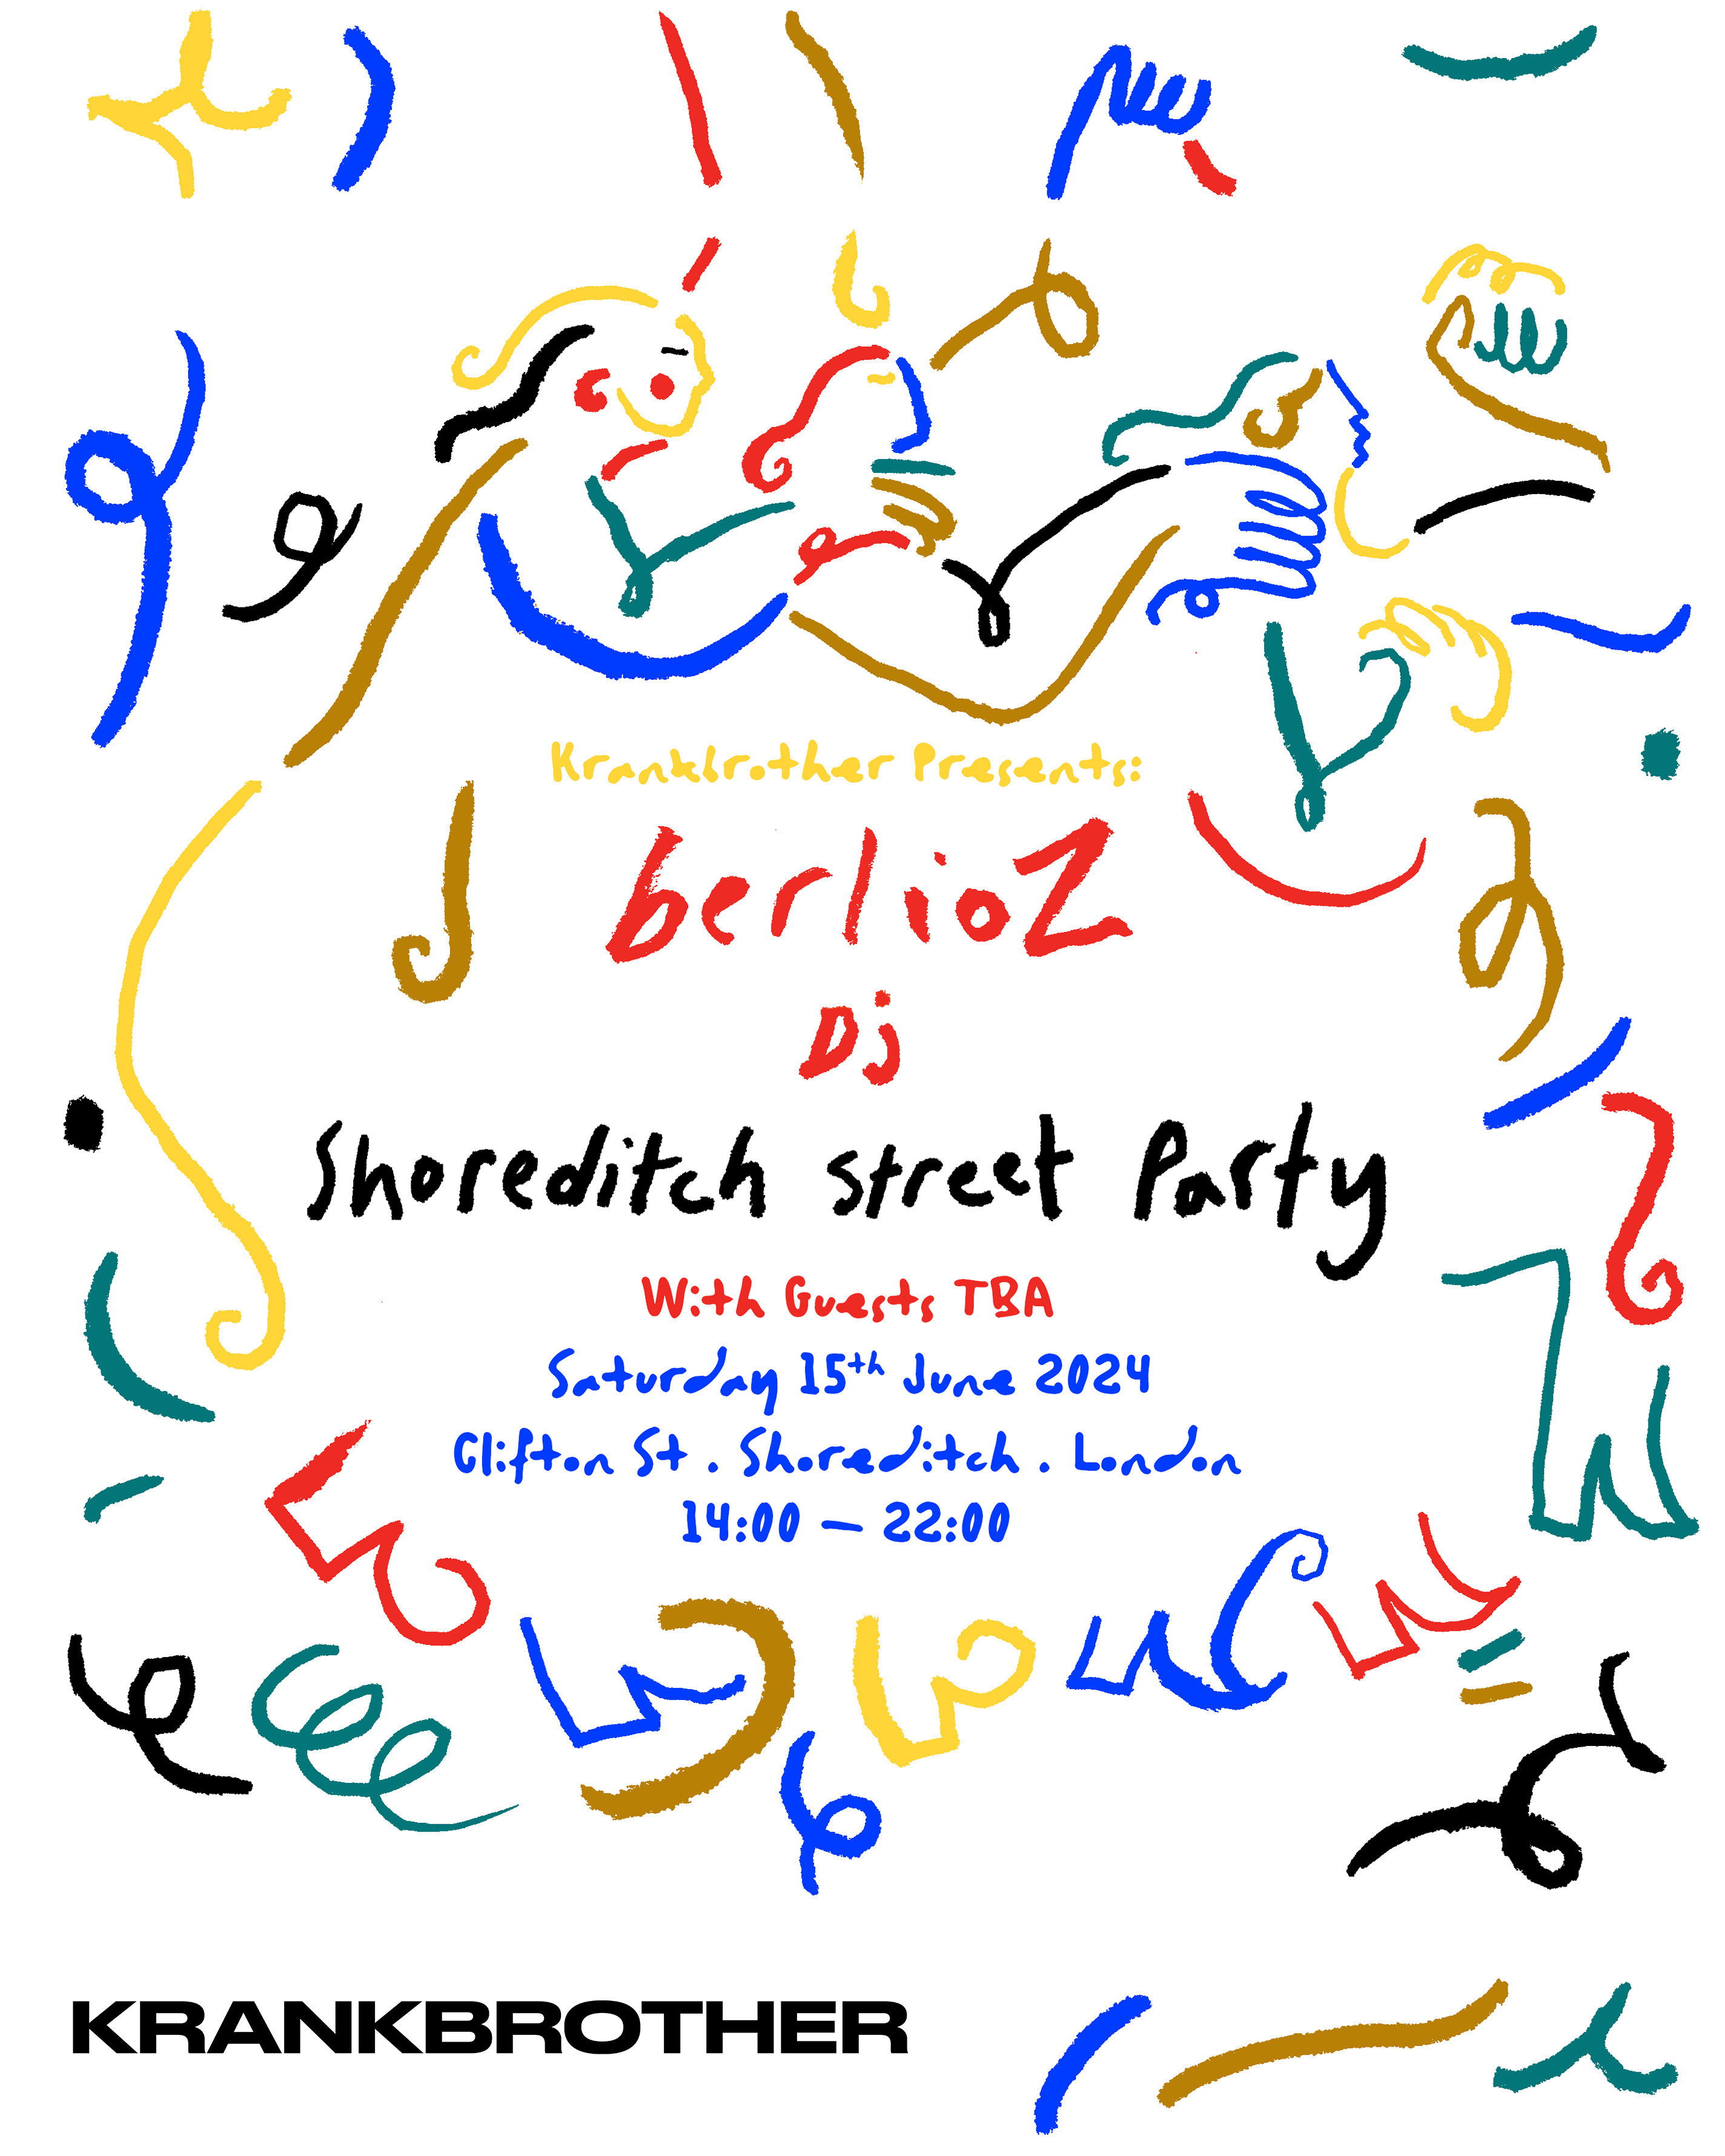 [SOLD OUT] krankbrother presents: berlioz Shoreditch Street Party - フライヤー表